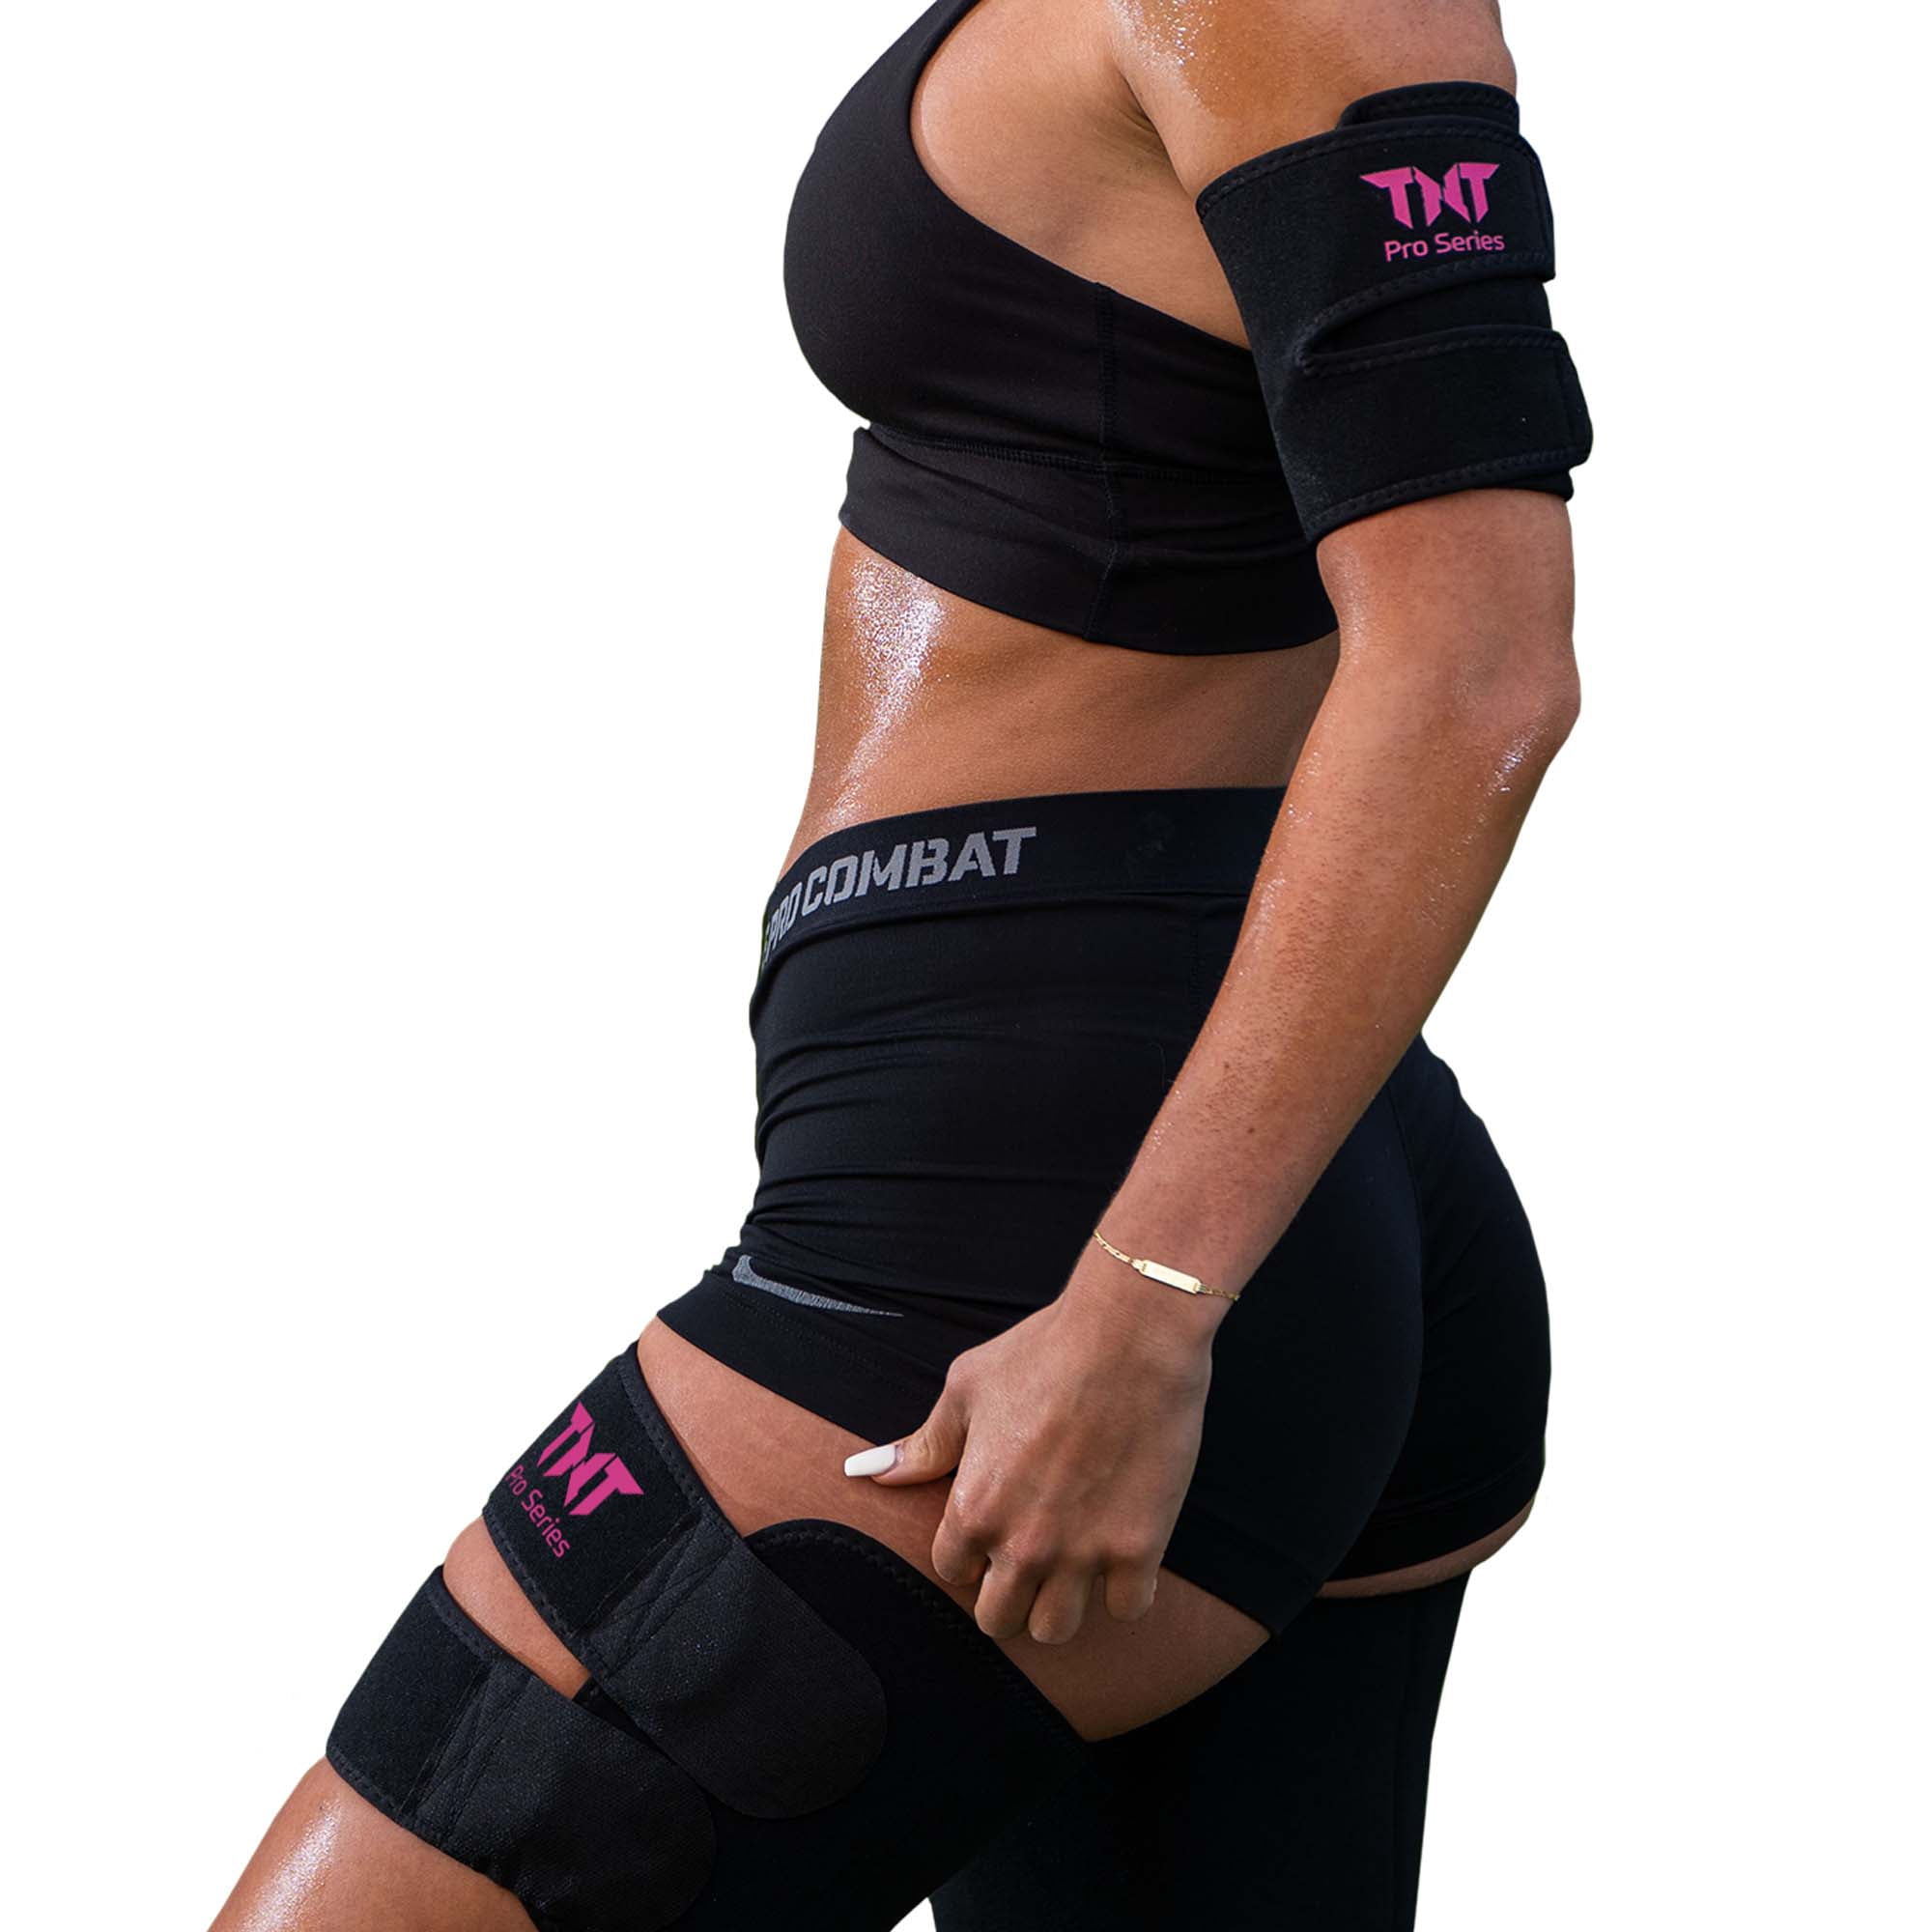 Adjustable Size Increase Heat & Sweat Production Tight Grip Slimming Wraps to Lose Fat & Cellulite DMoose Fitness Arm & Thigh Trimmers for Men & Women Patented D-Ring Fastening System